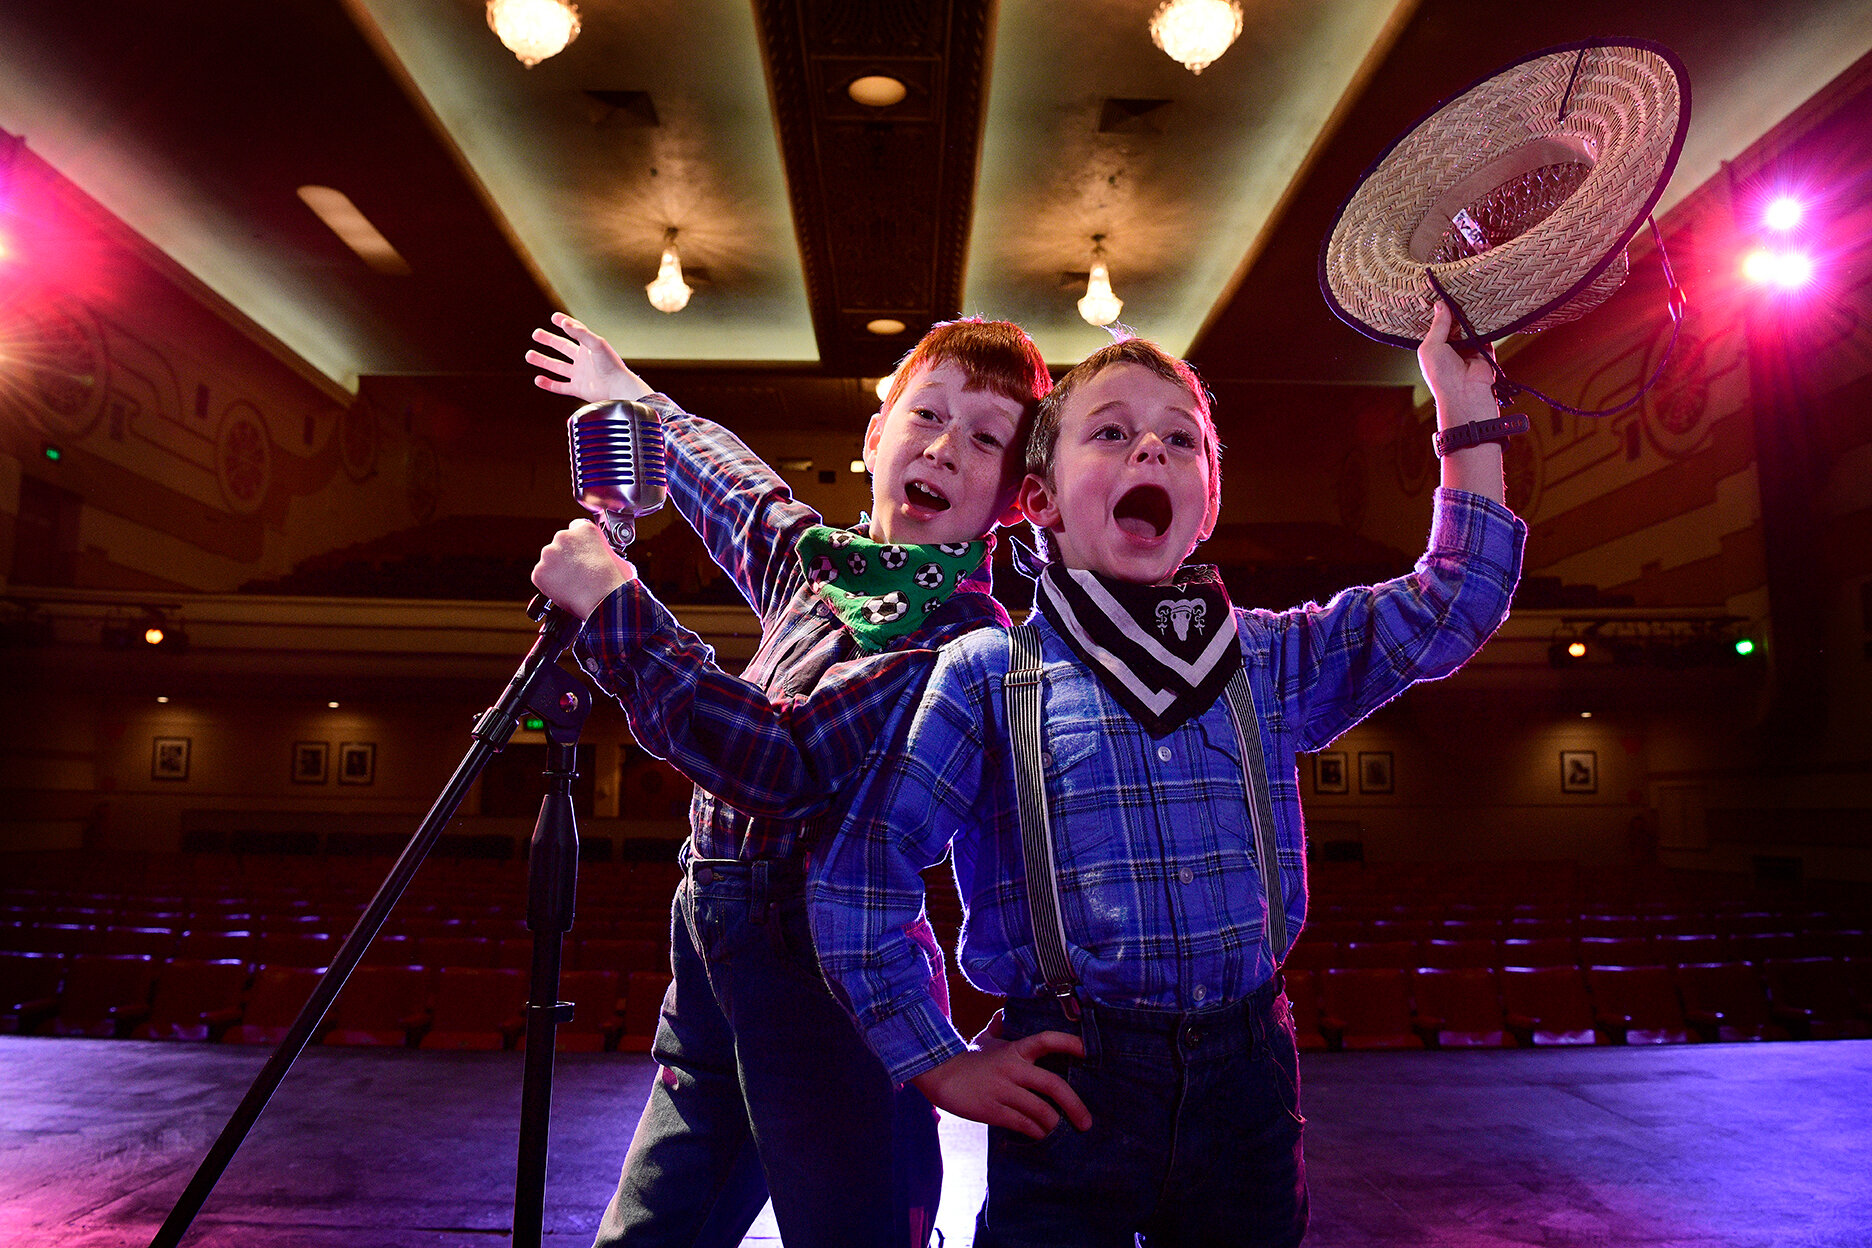  21.9.18 -  Ethan “Hiccups” Hall, 10, with his brother Toby, 7, at the Capri Theatre, Goodwood. Ethan is holding a big fundraiser event at the Capri Theatre in November, in aid of the drought. (The Advertiser, News Corp Australia) 